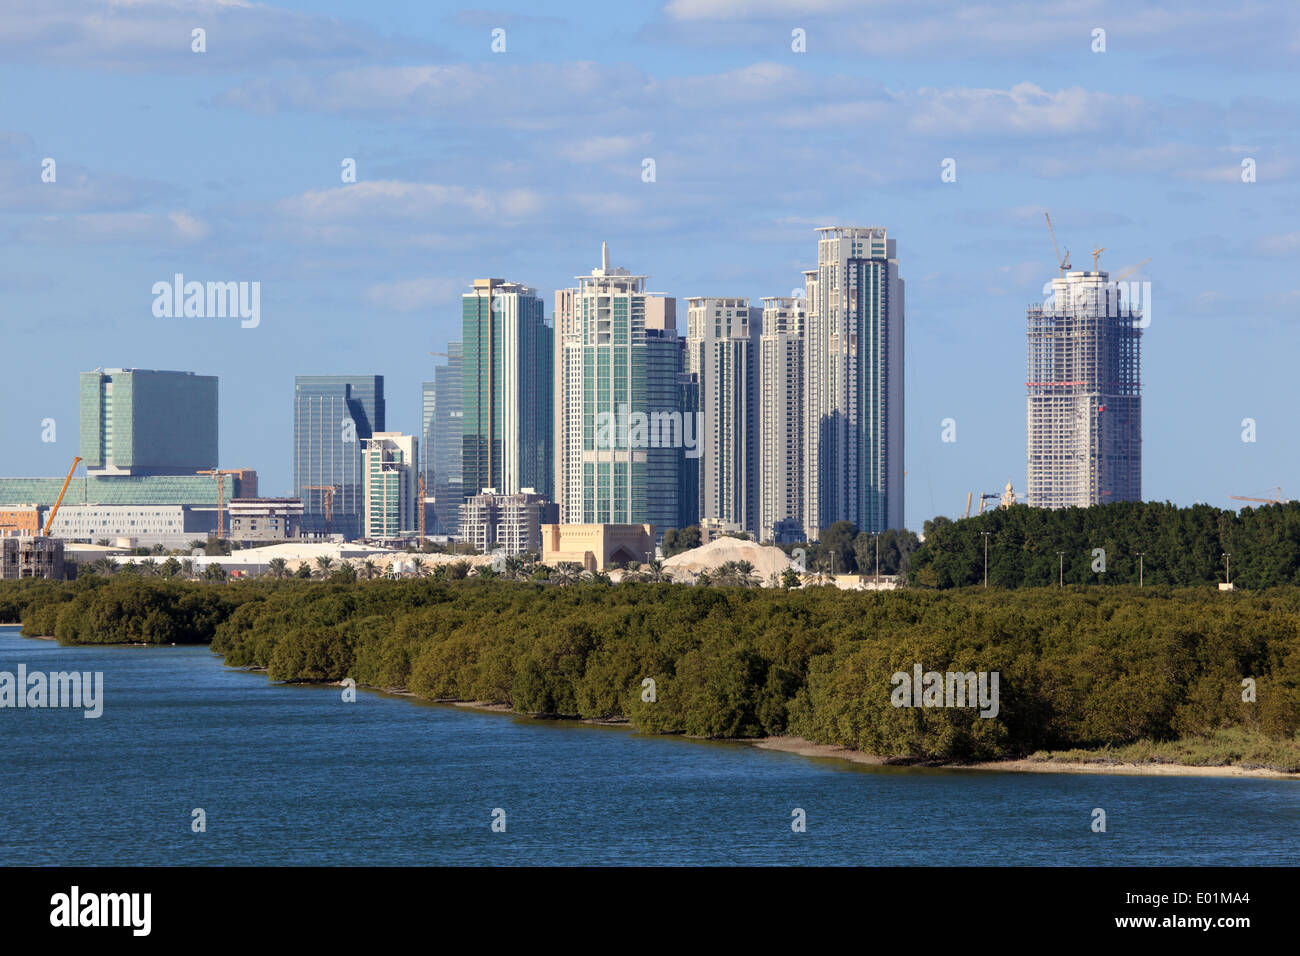 Skyline of Abu Dhabi Al Reem Island with mangrove forest in foreground Stock Photo